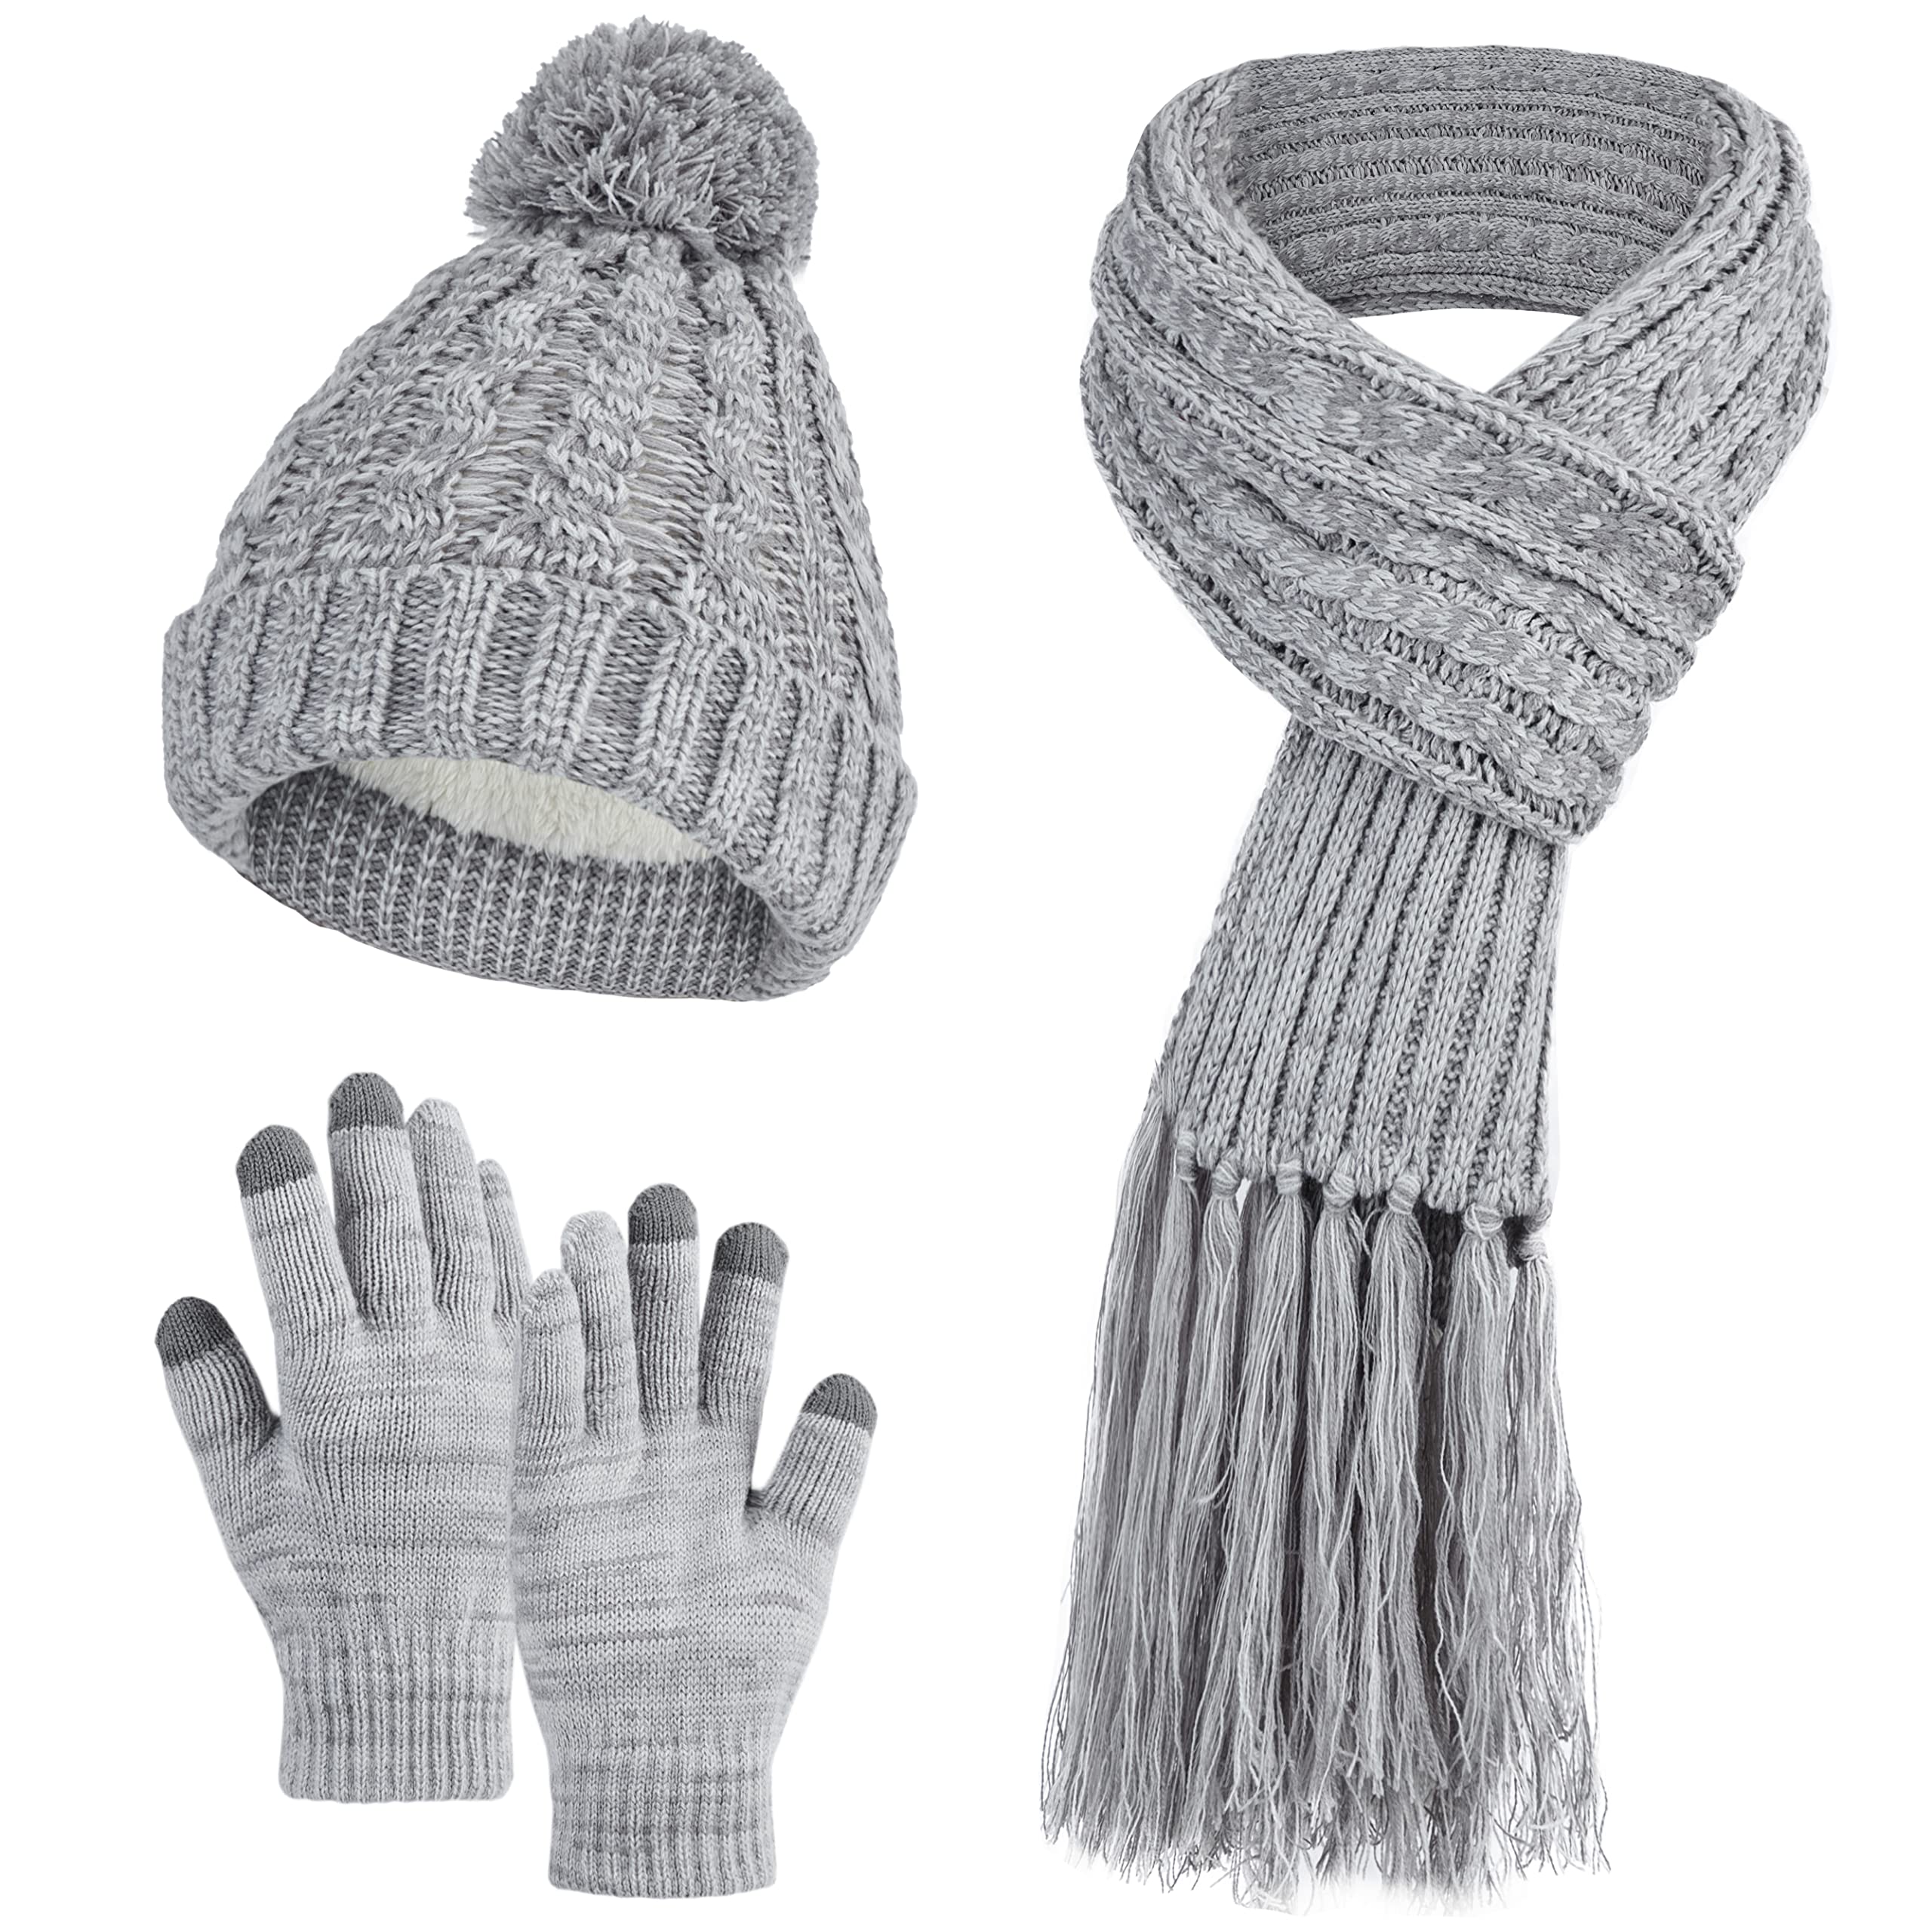 MissShorthair Women's Beanie Hat 3 in 1 Warm Long Scarf Touchscreen Glove Set of 3 Winter Thick Chunky Knitted Pom Pom Cap(Light gray)